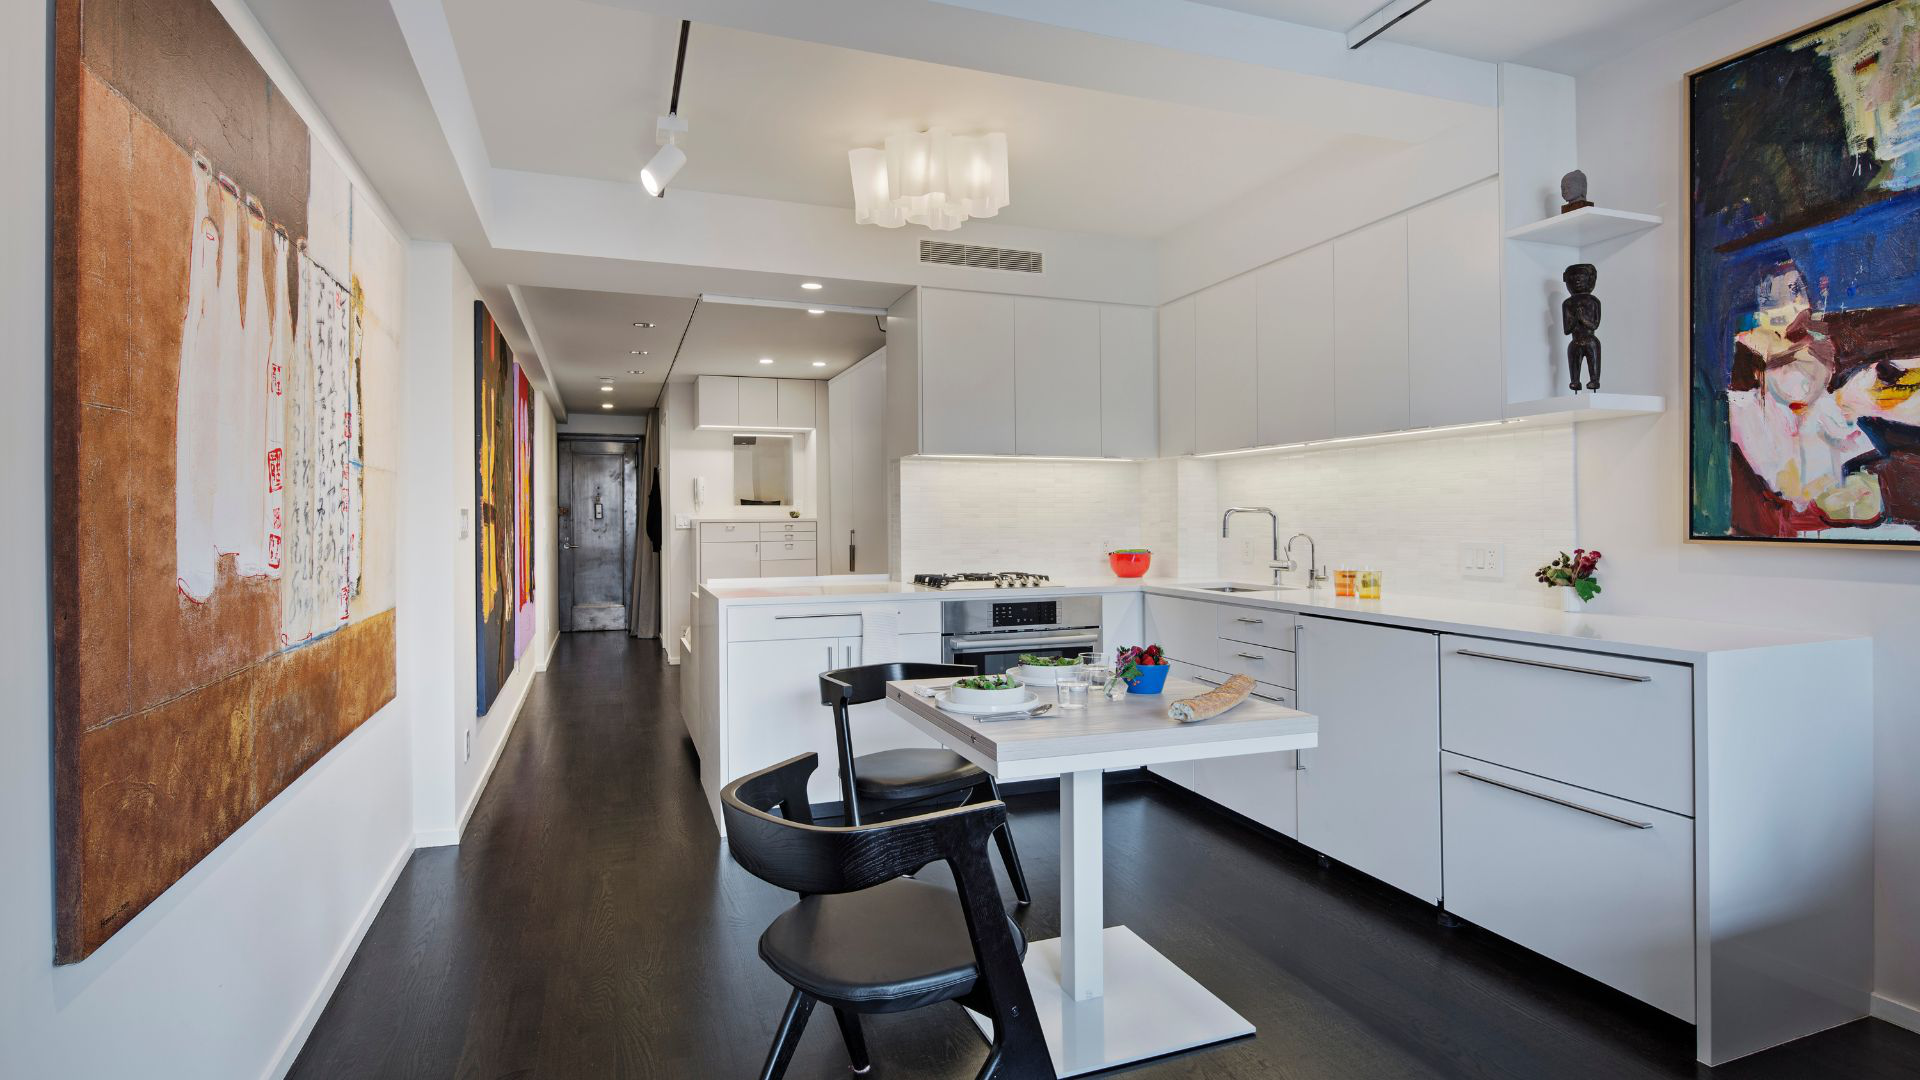 Looking the other way toward the front door, the all-white kitchen is below the counter, allowing your view to extend through the apartment.